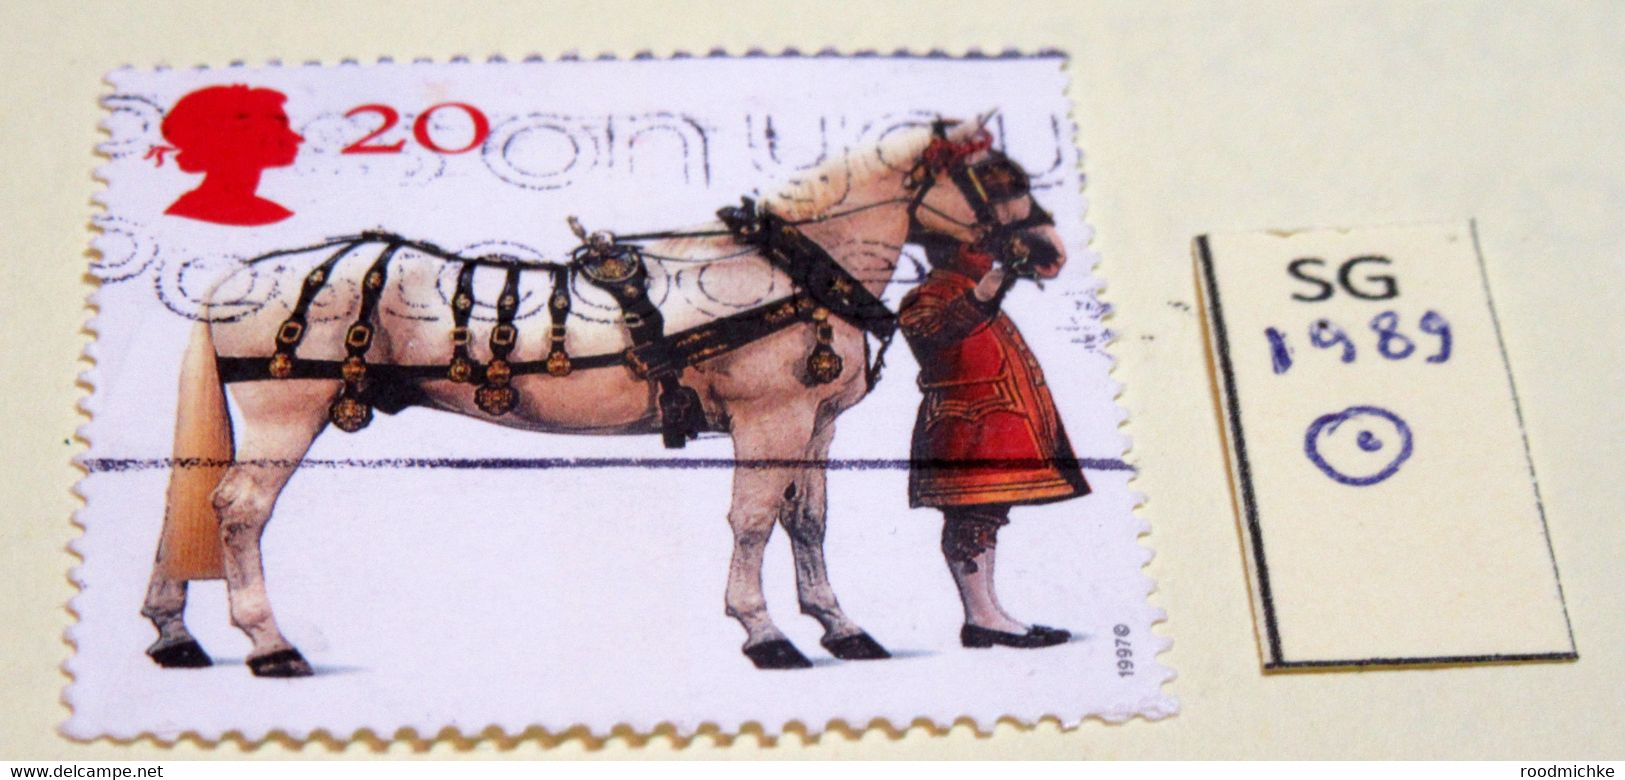 GB QE2 QUEEN HORSES SG 1989  20P   USED - Unclassified